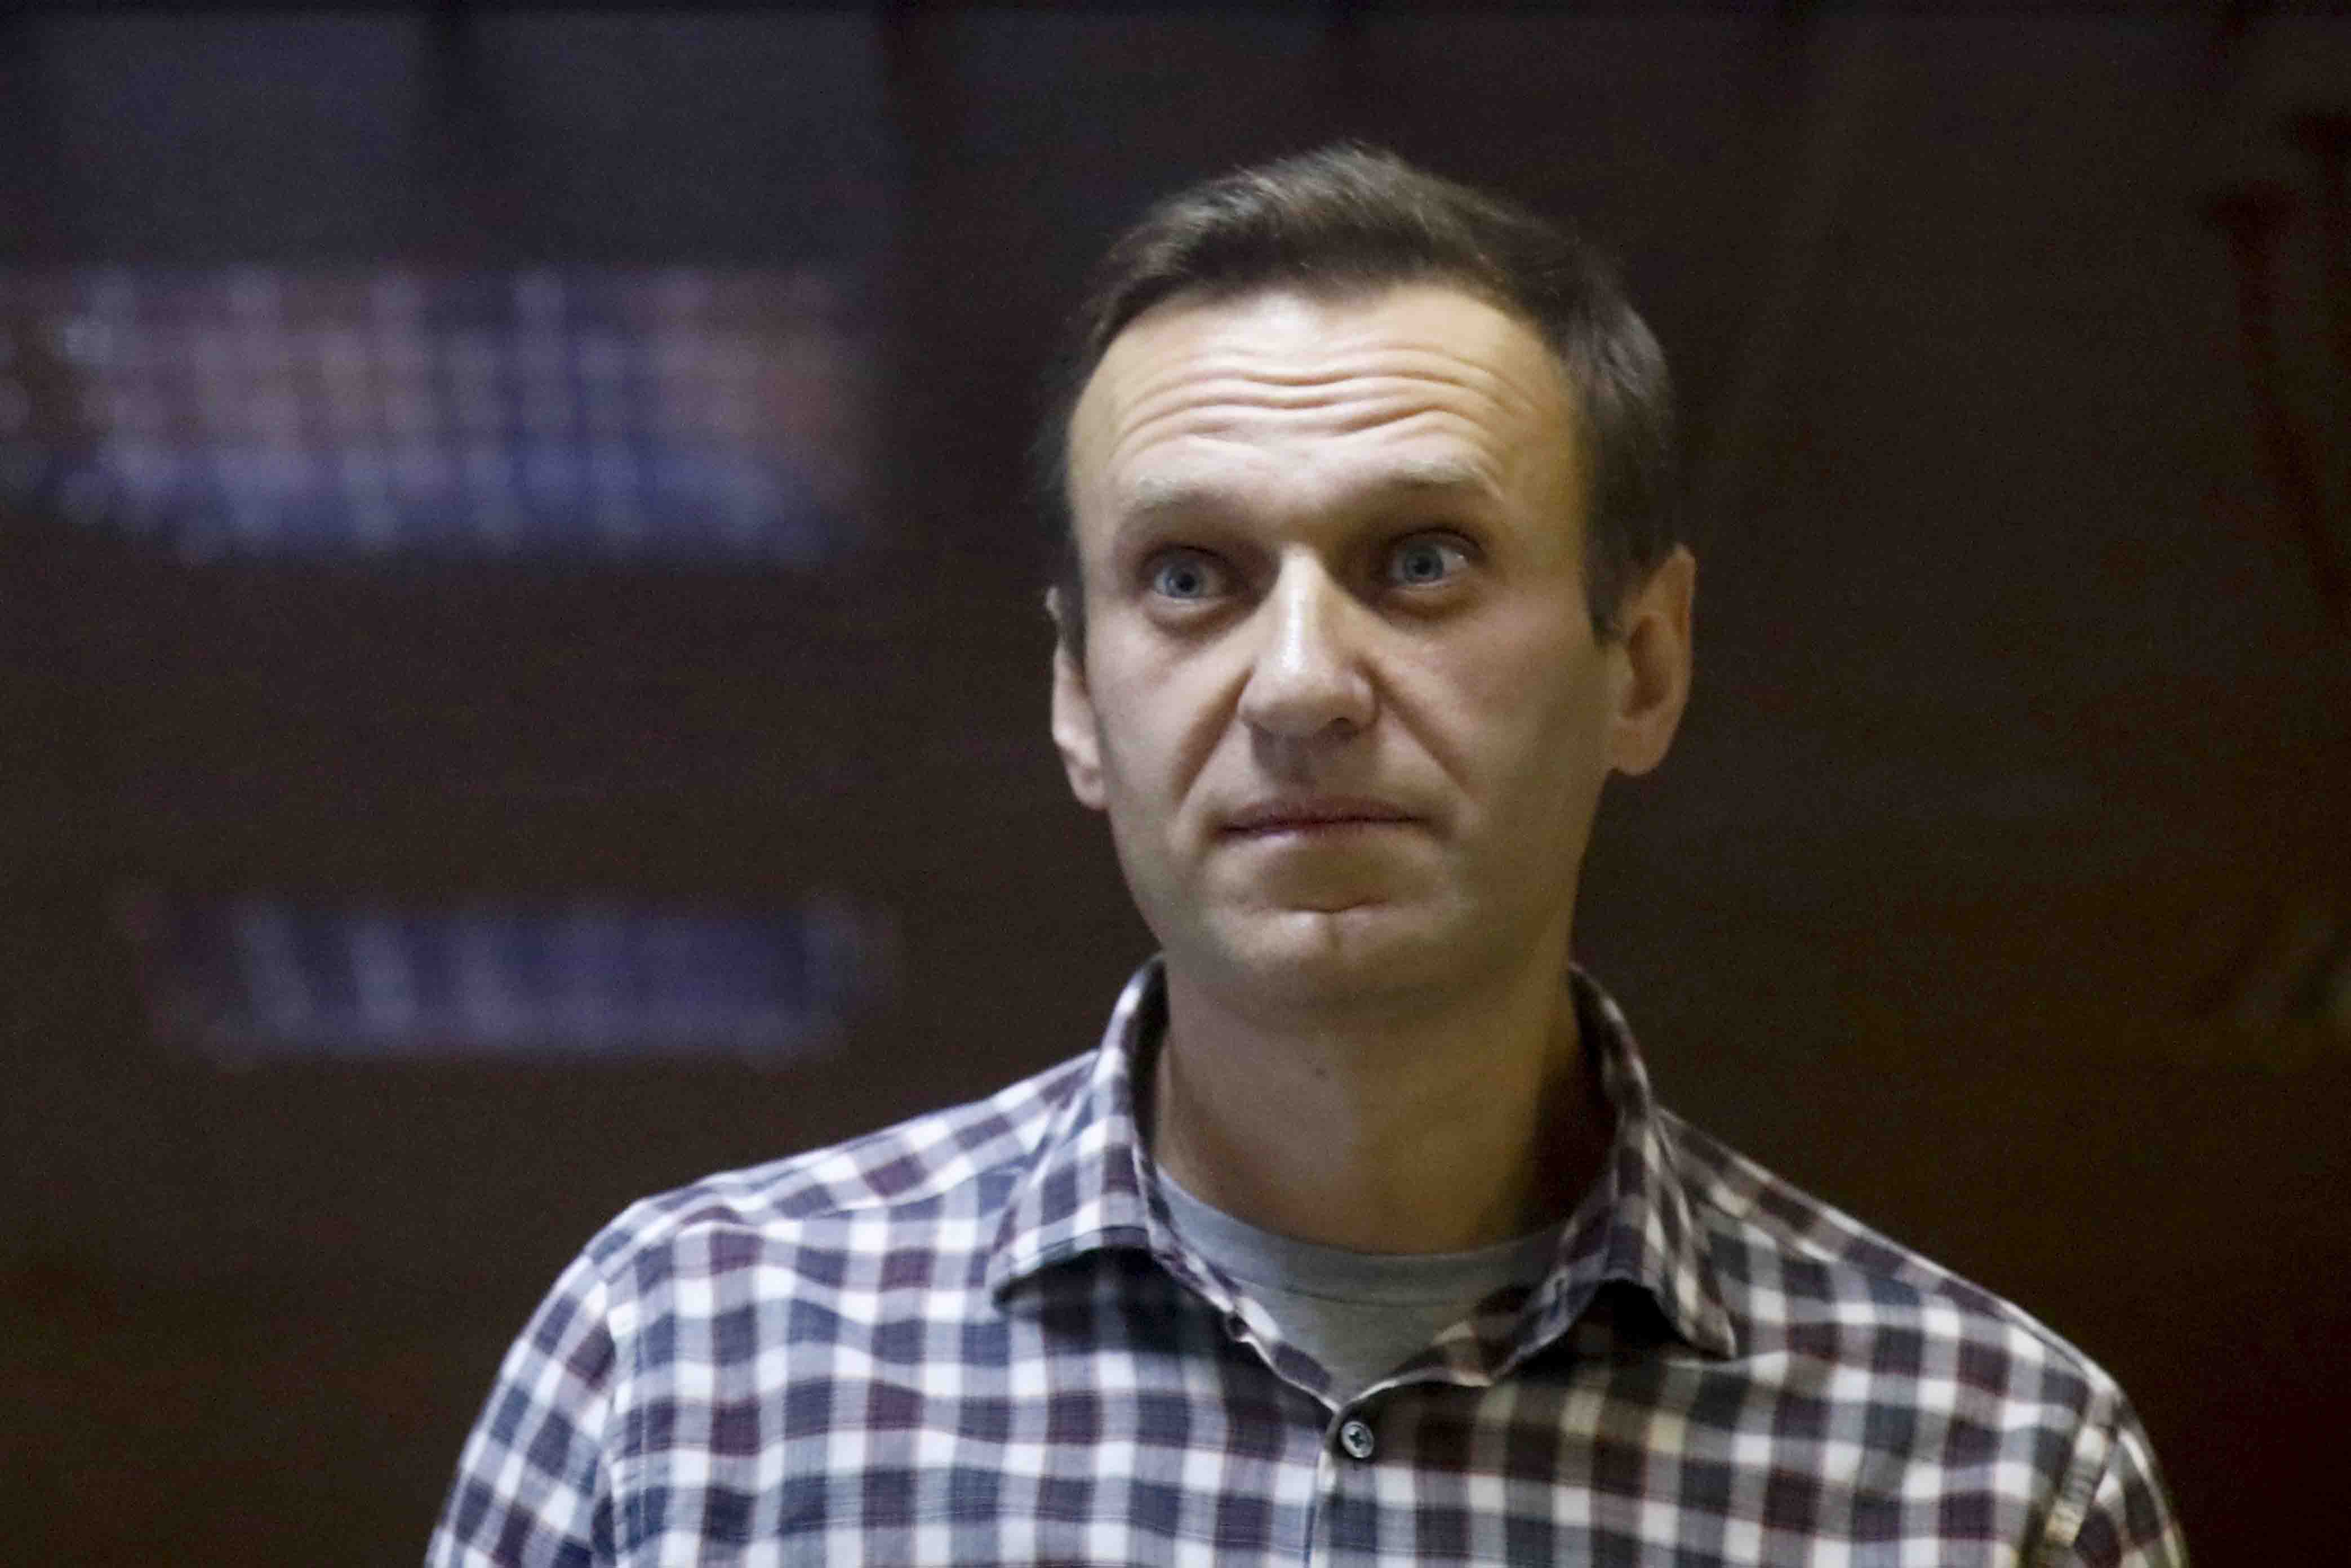 Alexei Navalny's doctors prevented from seeing him at prison clinic